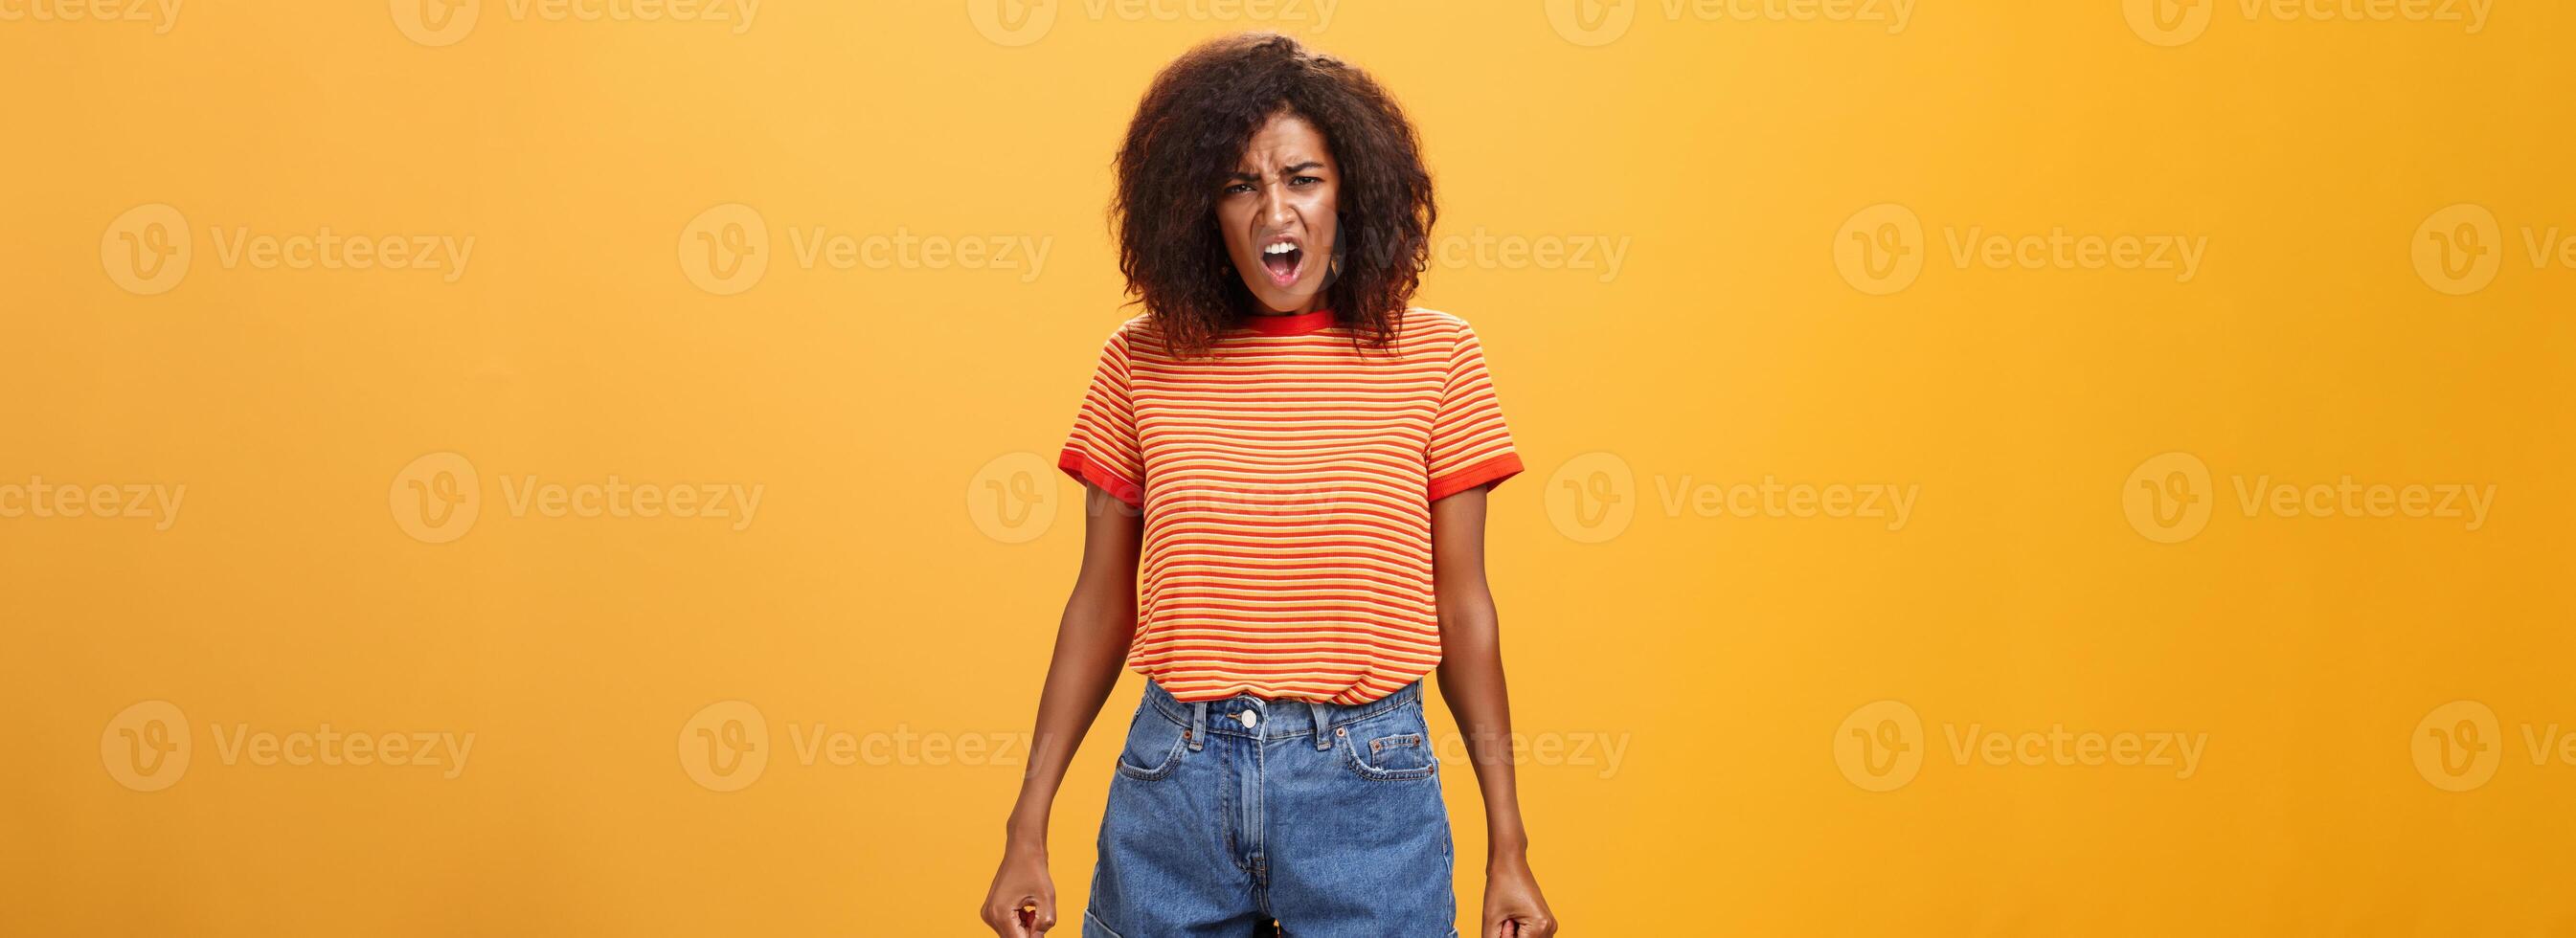 Girl complaining arguing with parents cause acting unfair. Displeased pissed and offended silly african american with afro hairstyle clenching teeth standing in insulted pose yelling over orange wall photo